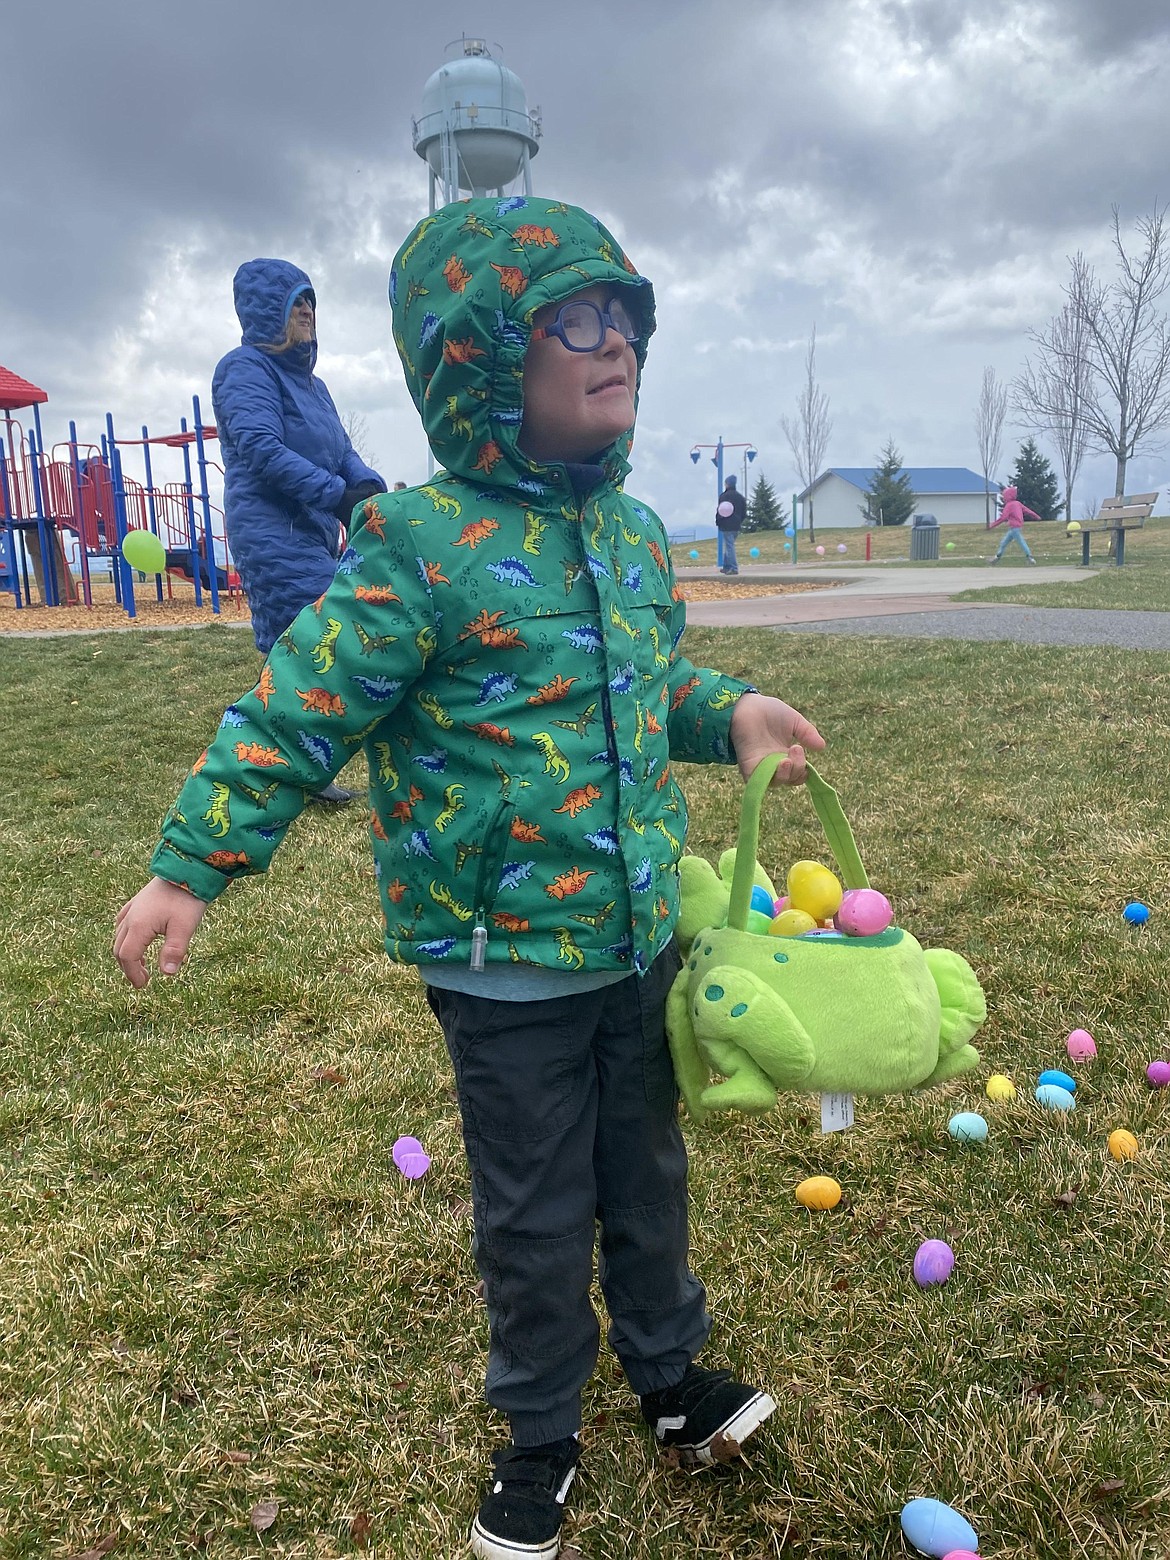 Six-year-old Ronin Kale holds his full-to-the-brim basket of Easter eggs, Saturday at the Village Bakery inclusive egg hunt, held at Majestic Park in Rathdrum.